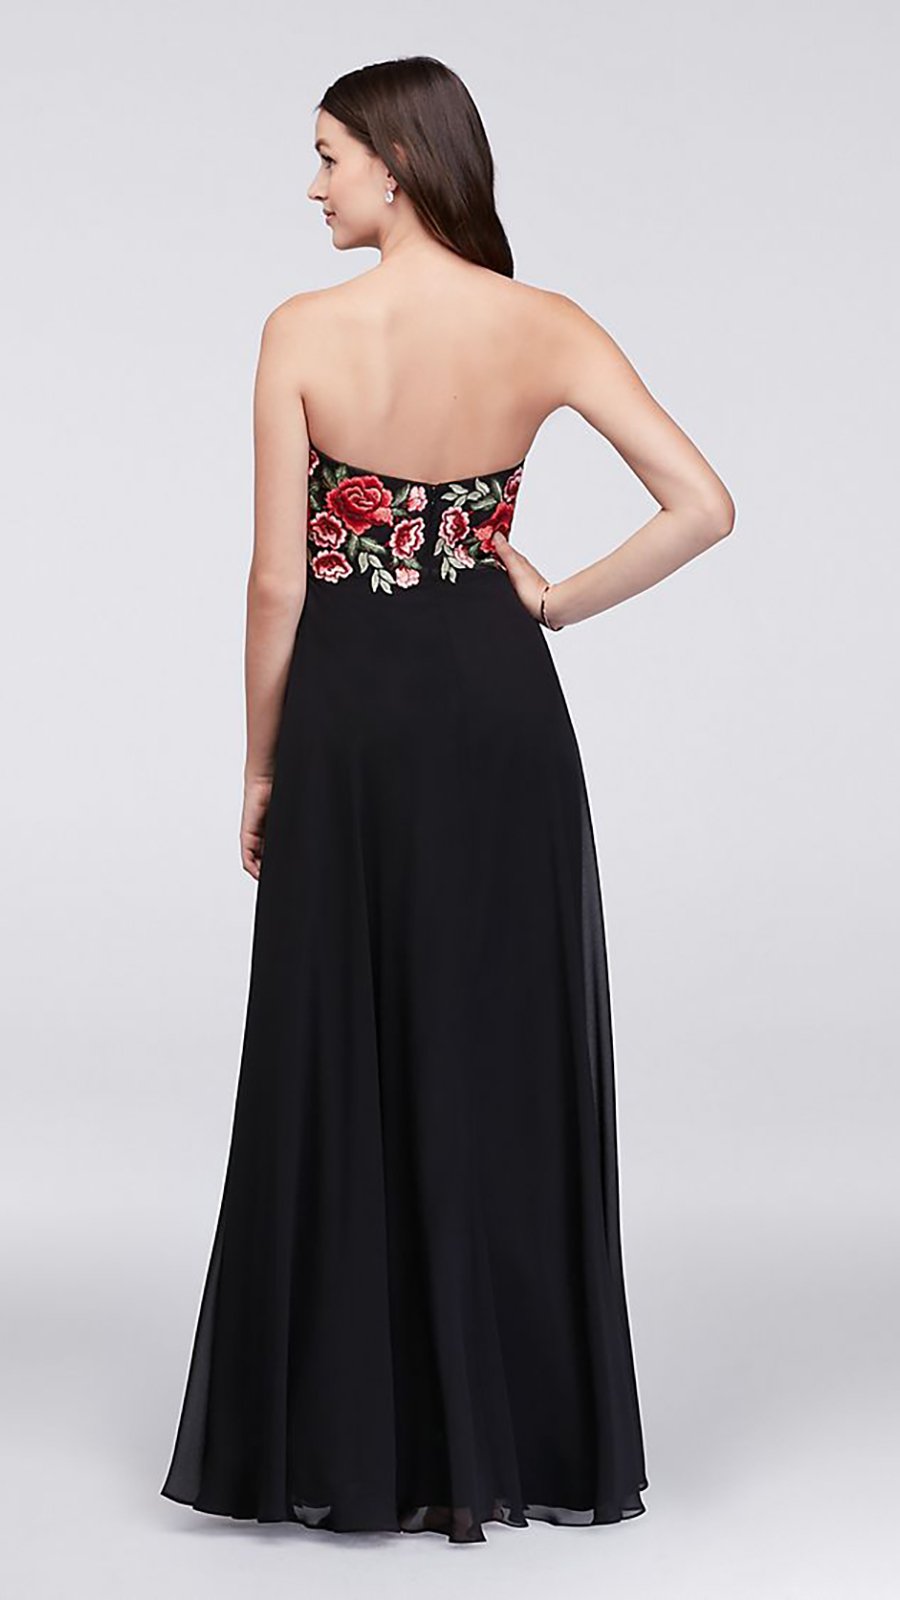 Decode 1.8 - 184068SC Floral Embroidered Strapless Empire Dress